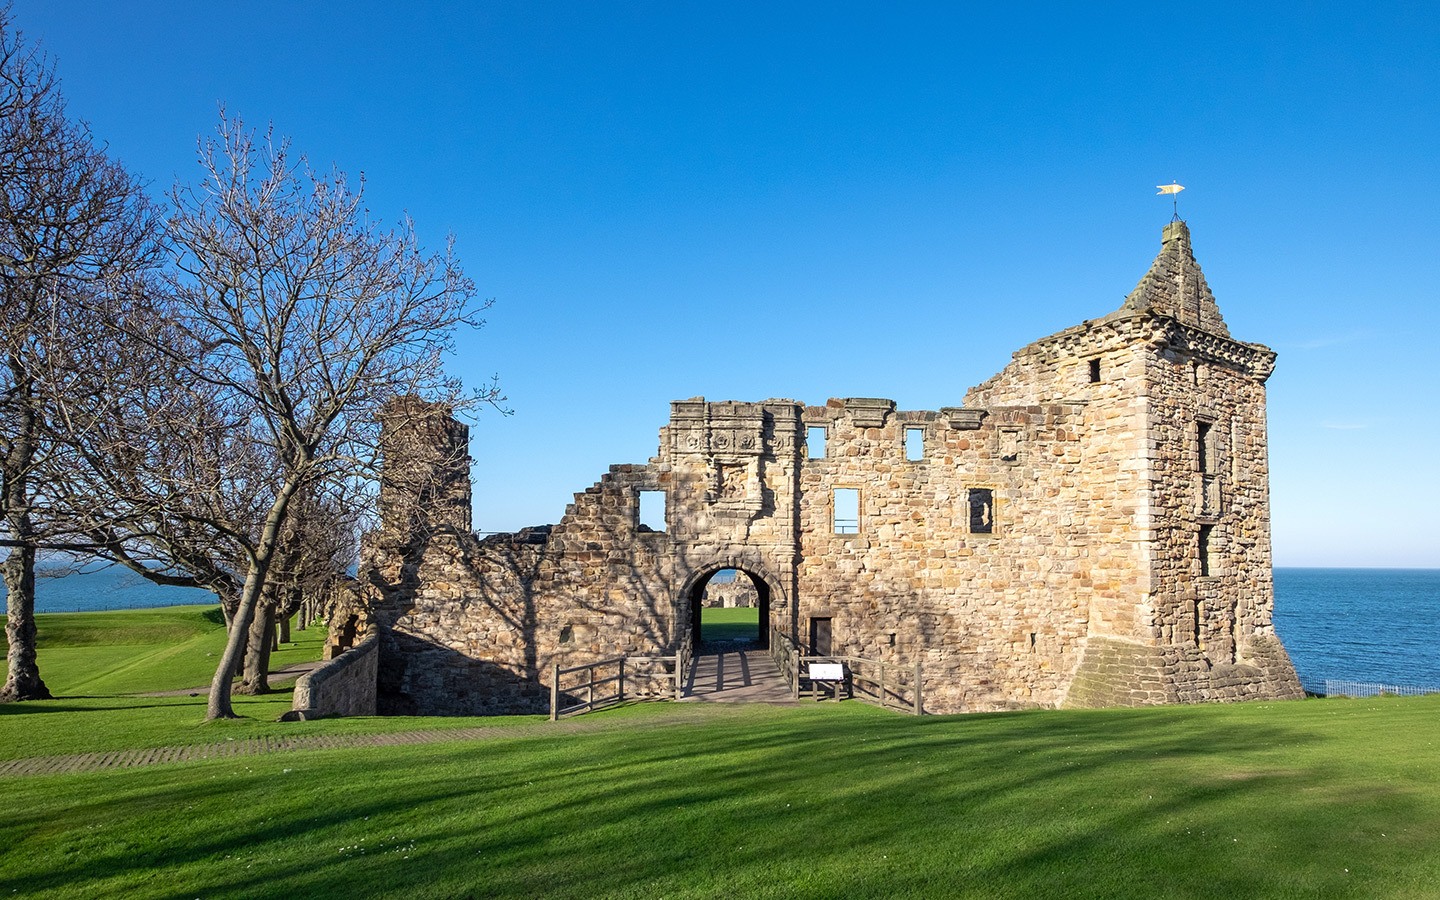 The ruins of St Andrews Castle in Scotland